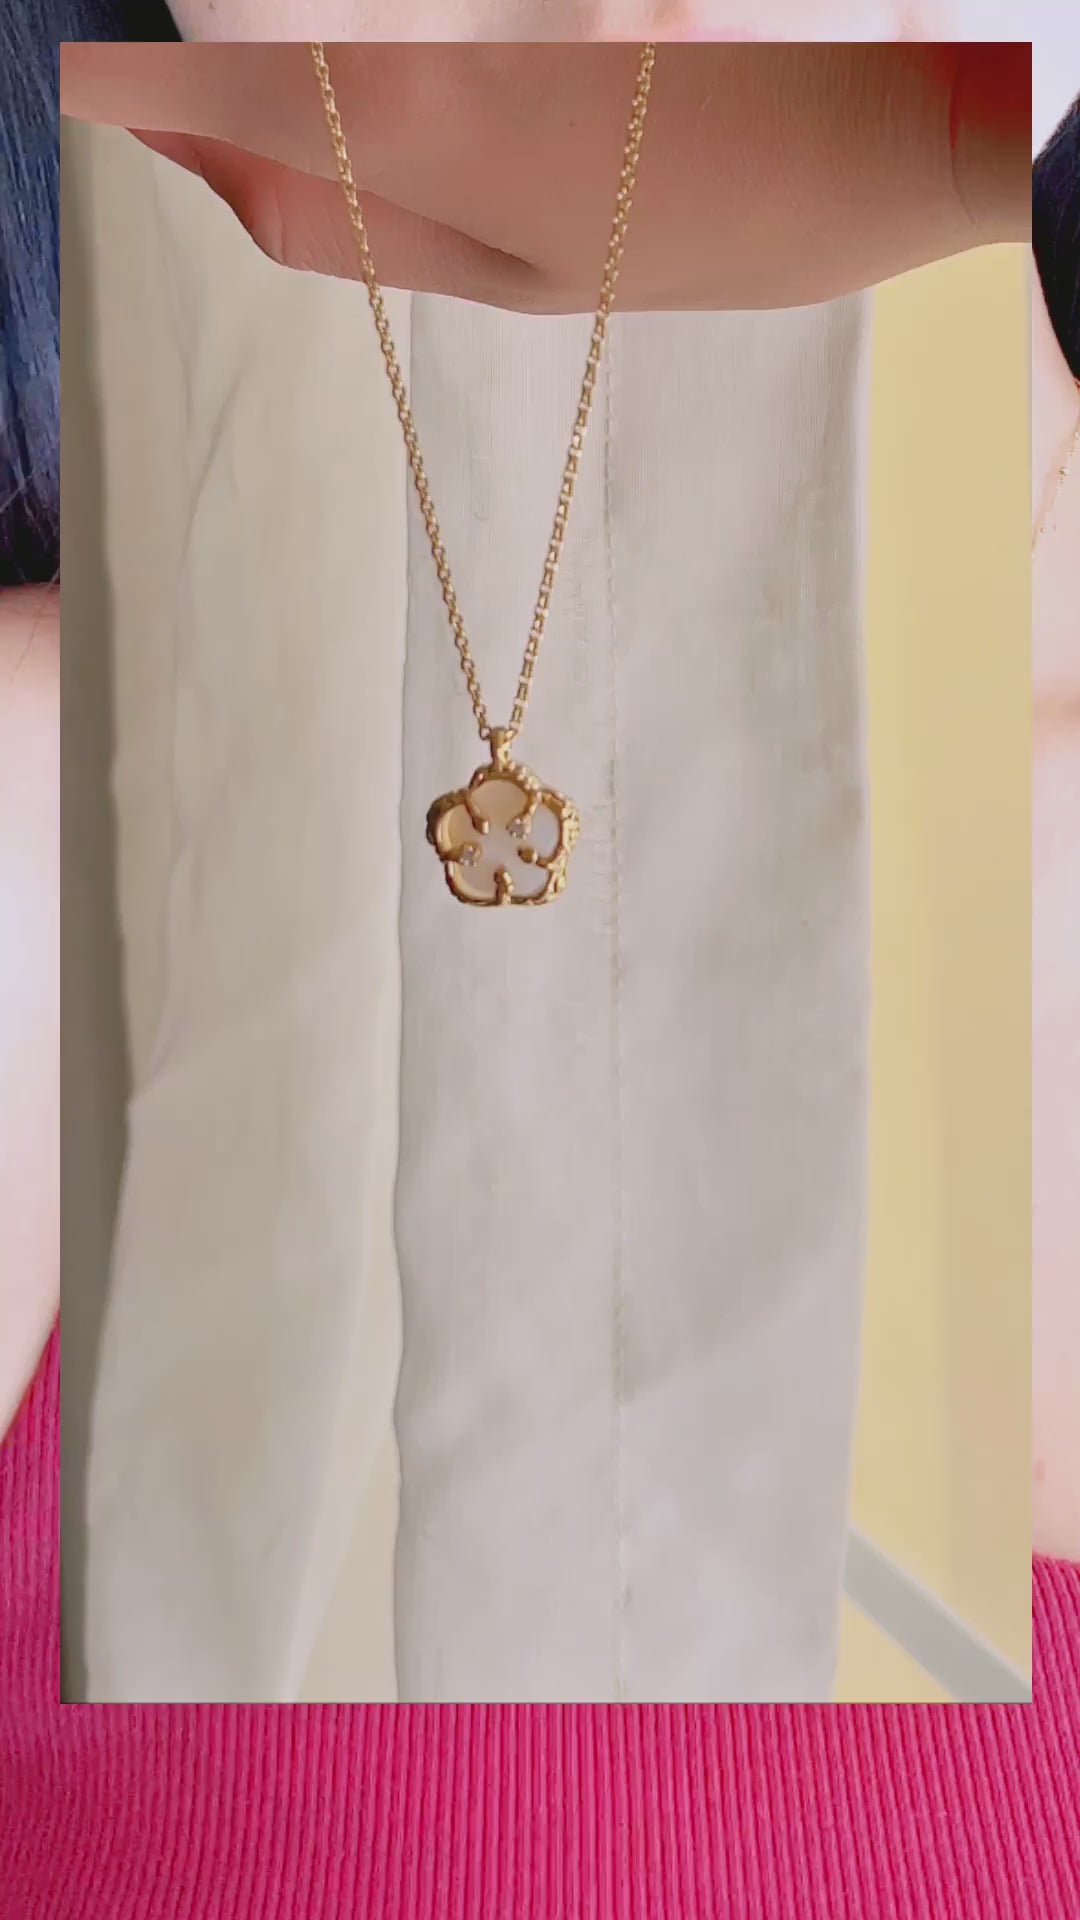 video of modeal wearing 18k gold vermeil medallion necklace